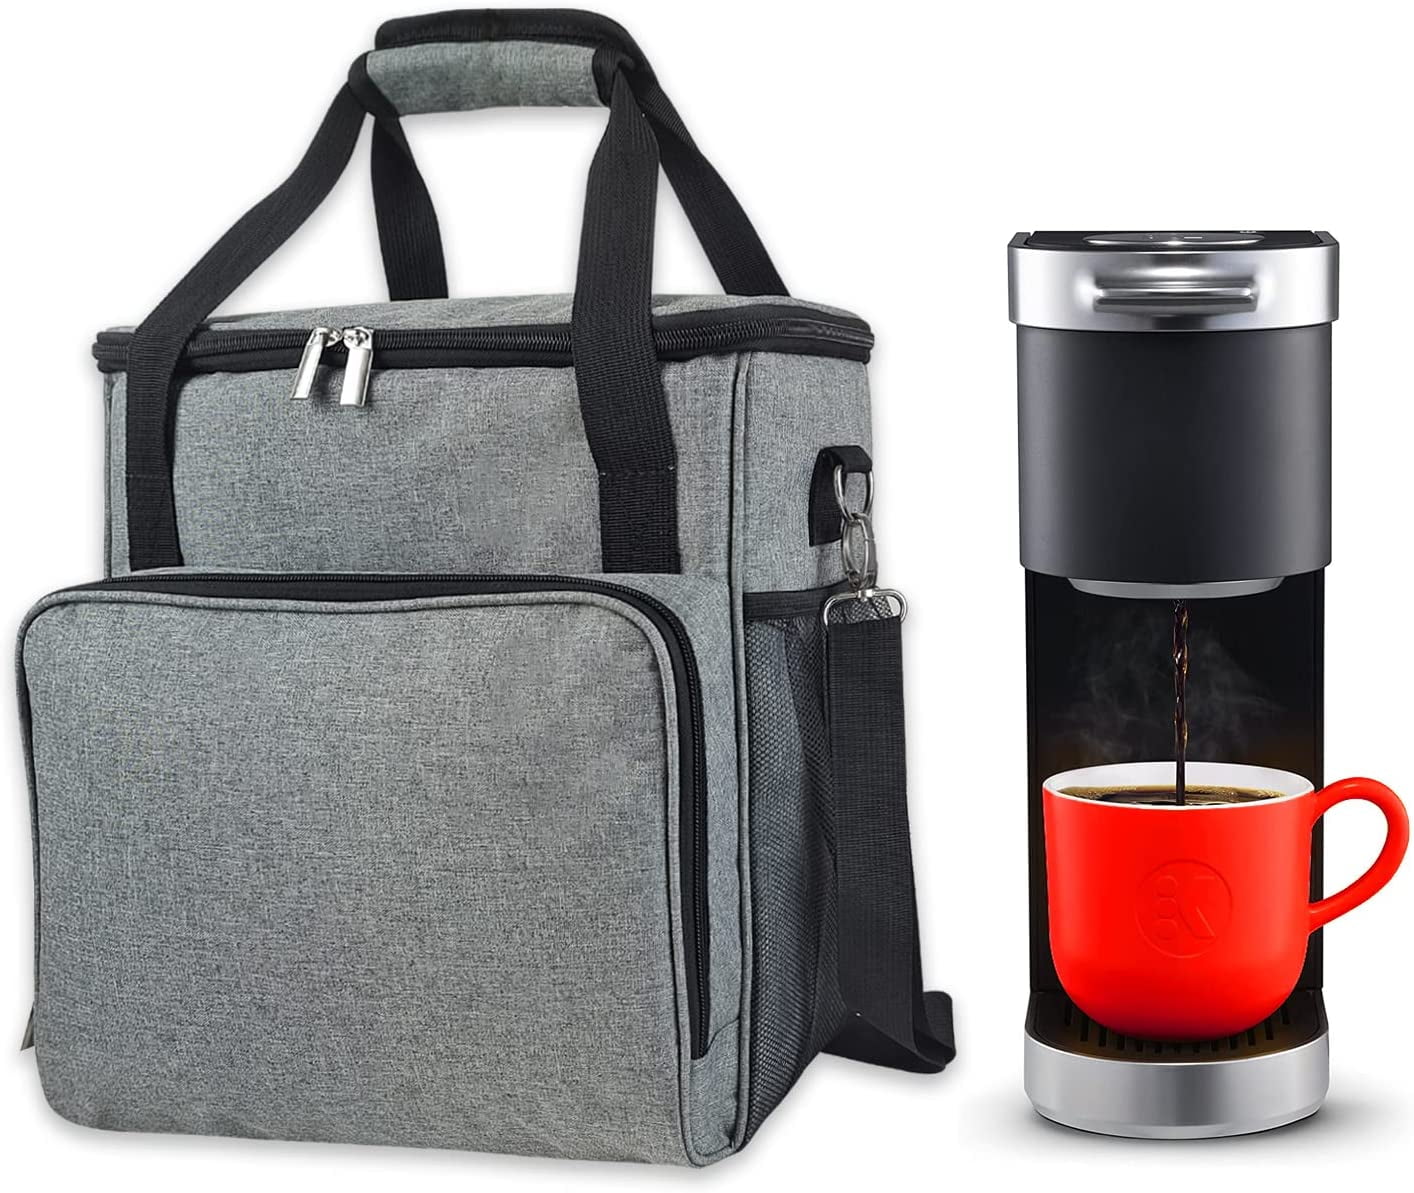 VOSDANS Travel Coffee Maker Carry Bag With a Cover, Travel Case for Keurig  K-Mini or Keurig K-Mini Plus Coffee Maker or Coffee Pod or Keurig Travel